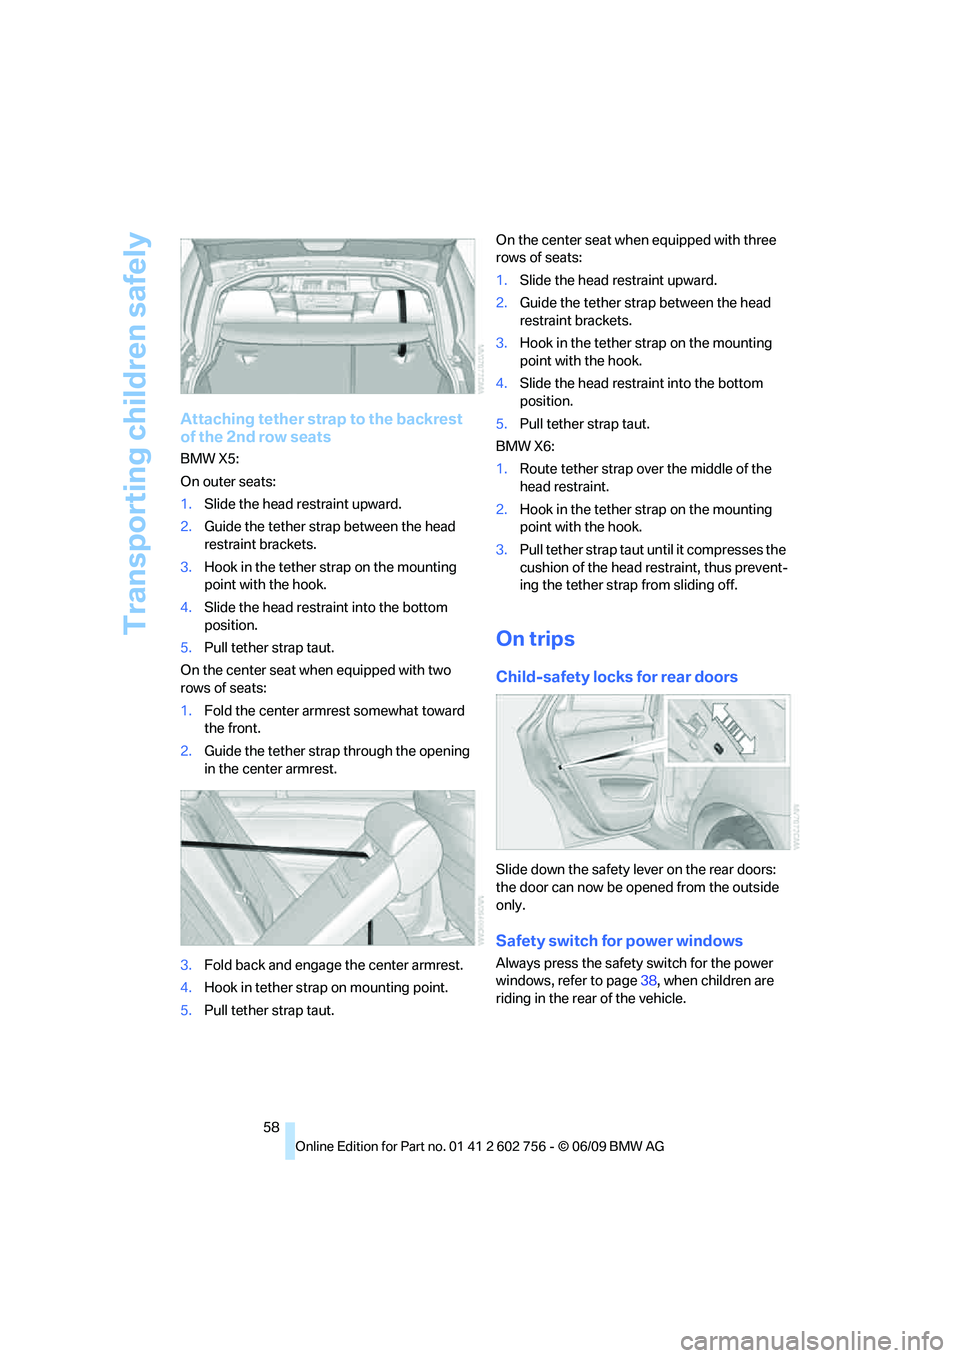 BMW X6 2010  Owners Manual Transporting children safely
58
Attaching tether strap to the backrest 
of the 2nd row seats
BMW X5:
On outer seats:
1.Slide the head restraint upward.
2.Guide the tether strap between the head 
restr